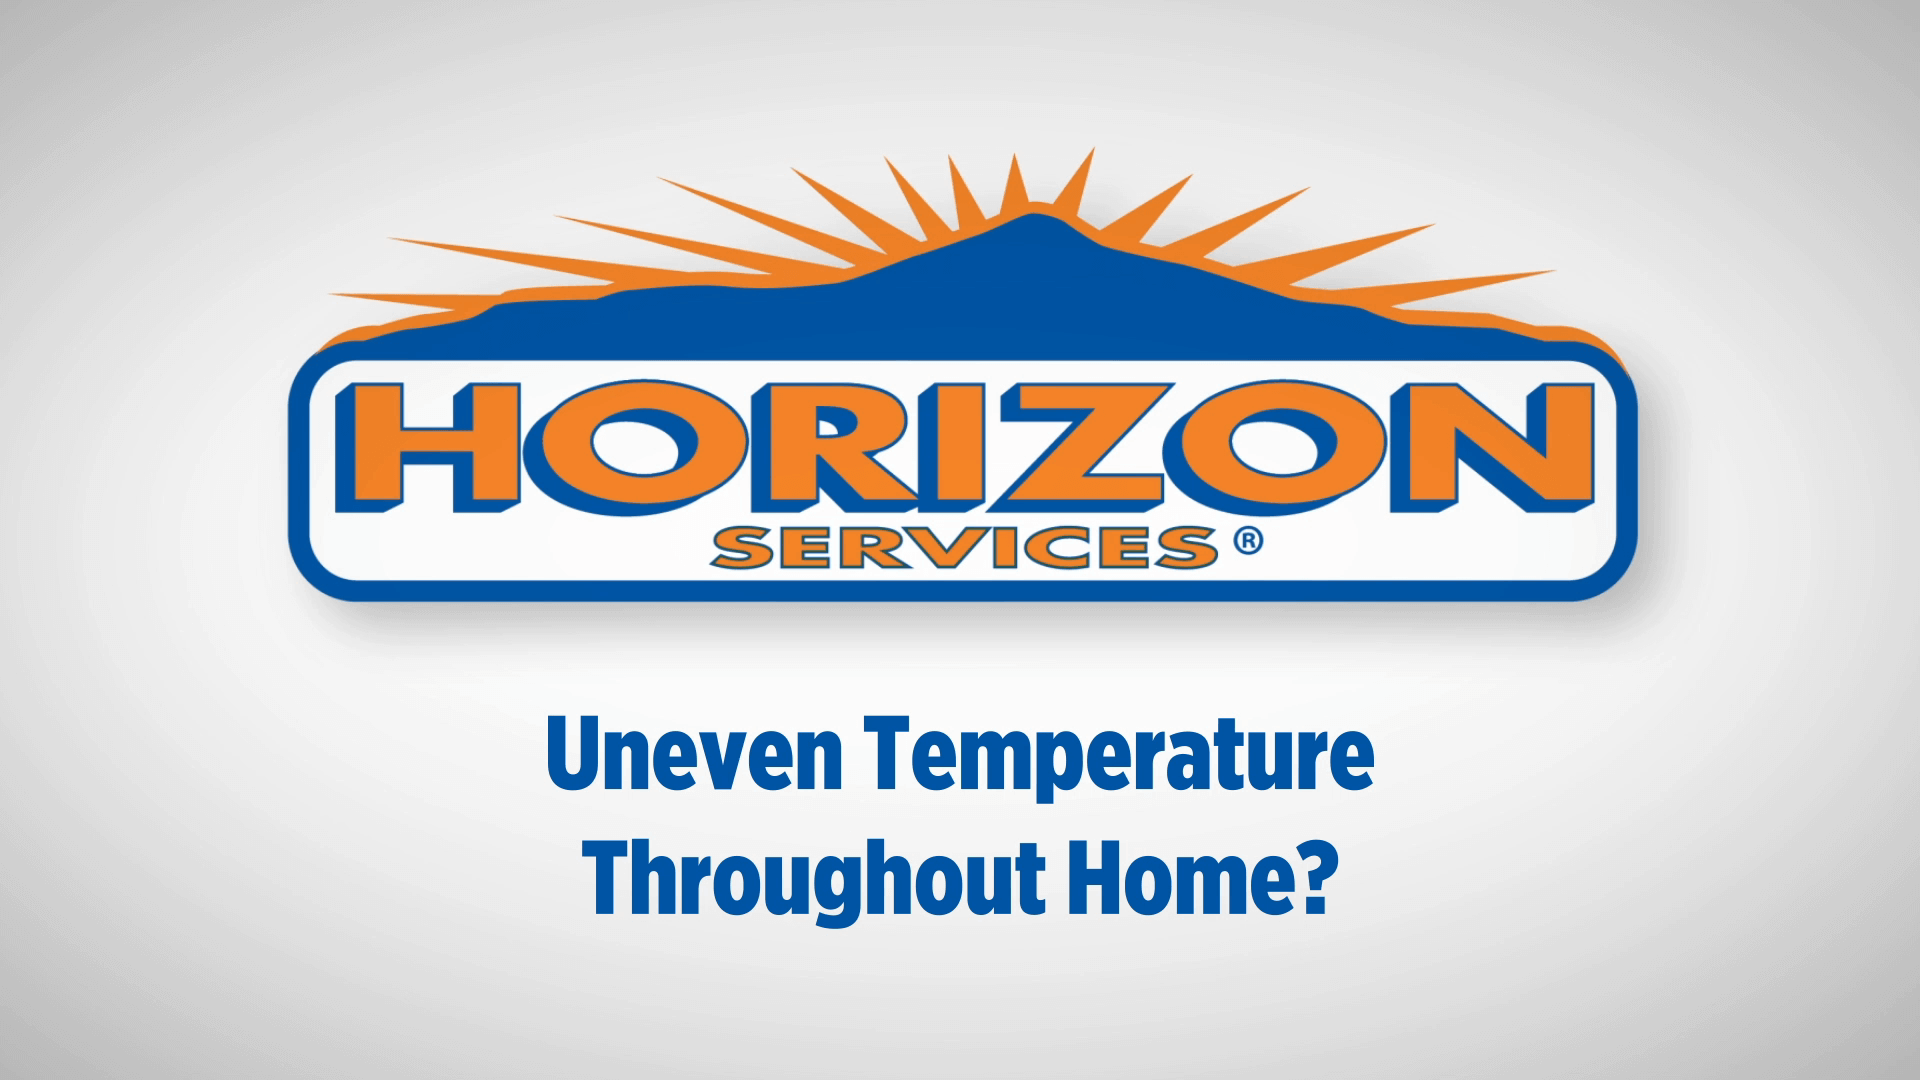 Horizon Services logo with uneven temperatures throughout home text